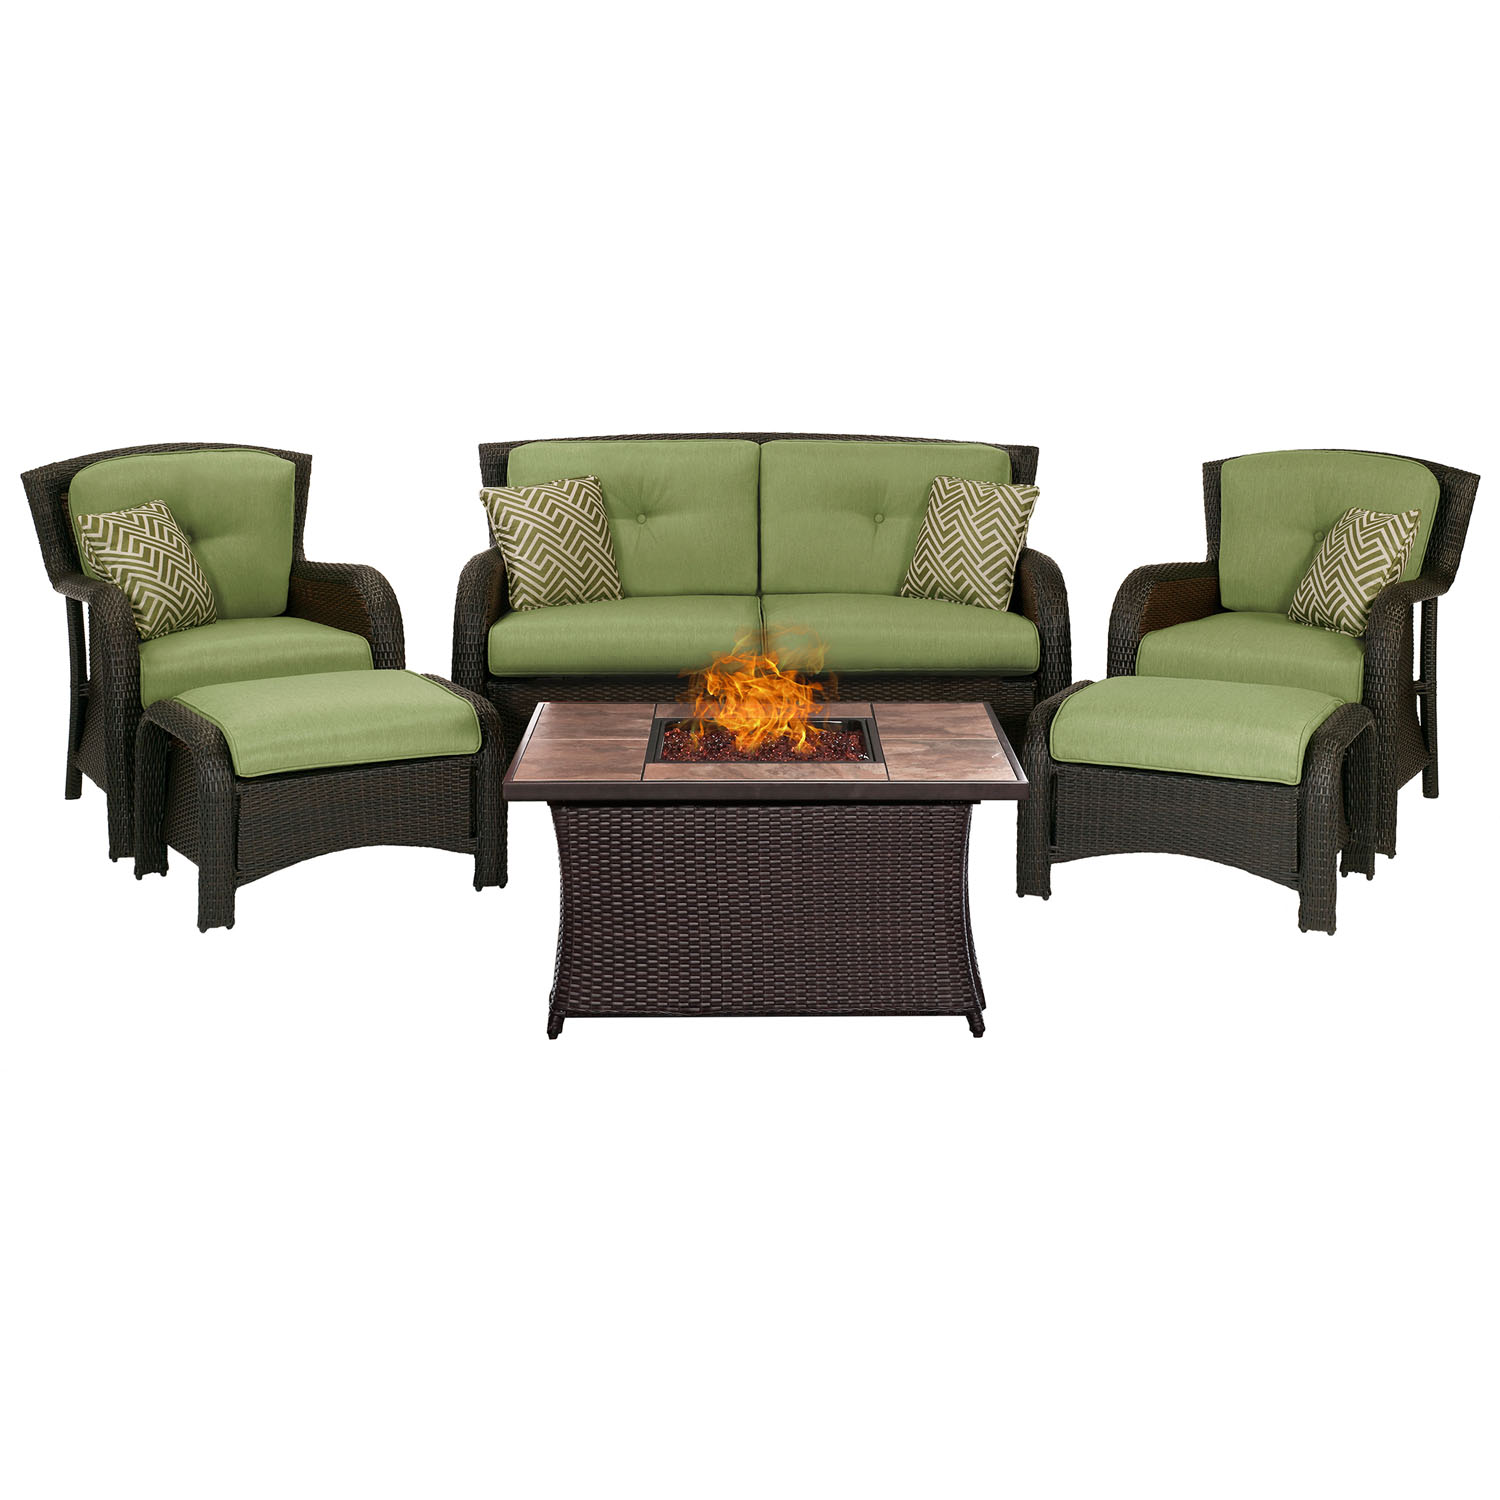 Hanover Strathmere 6 Pcs Wicker Fire Pit Chat Set, Cilantro Green - image 1 of 14